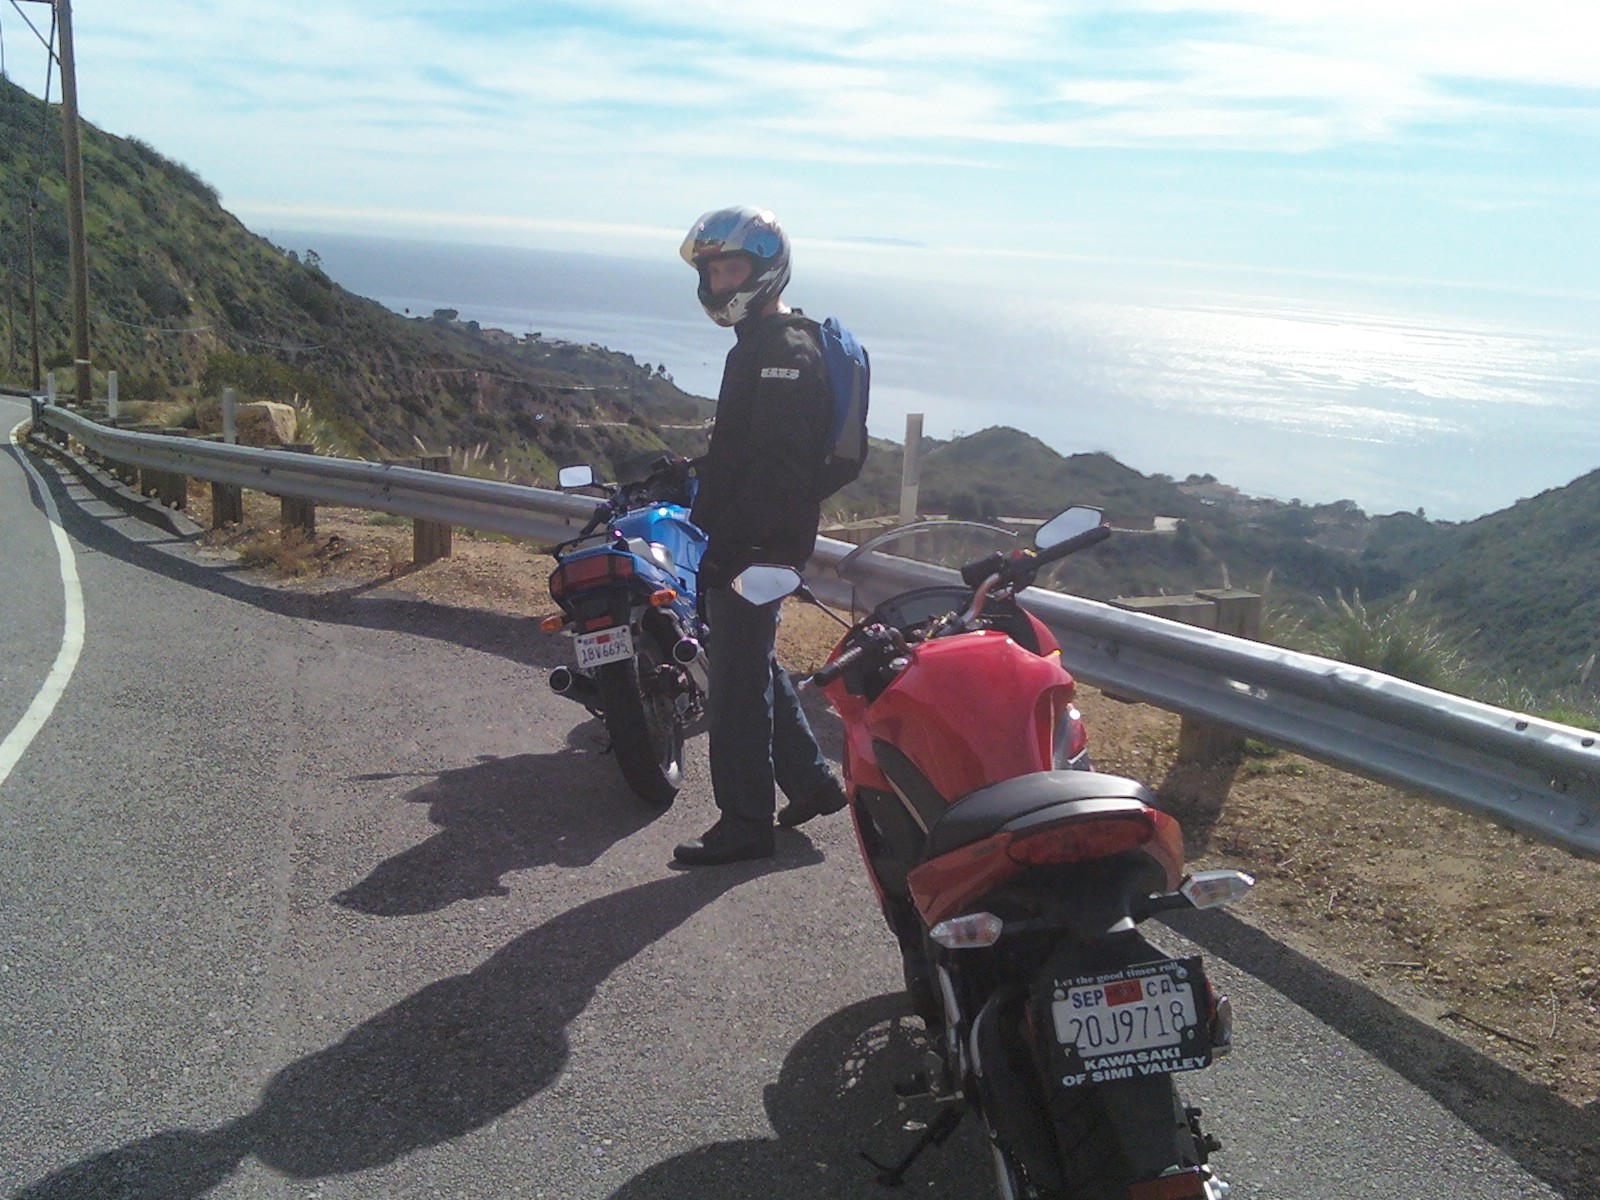 Me and my friend taking our Ninjas through decker canyon to the PCH